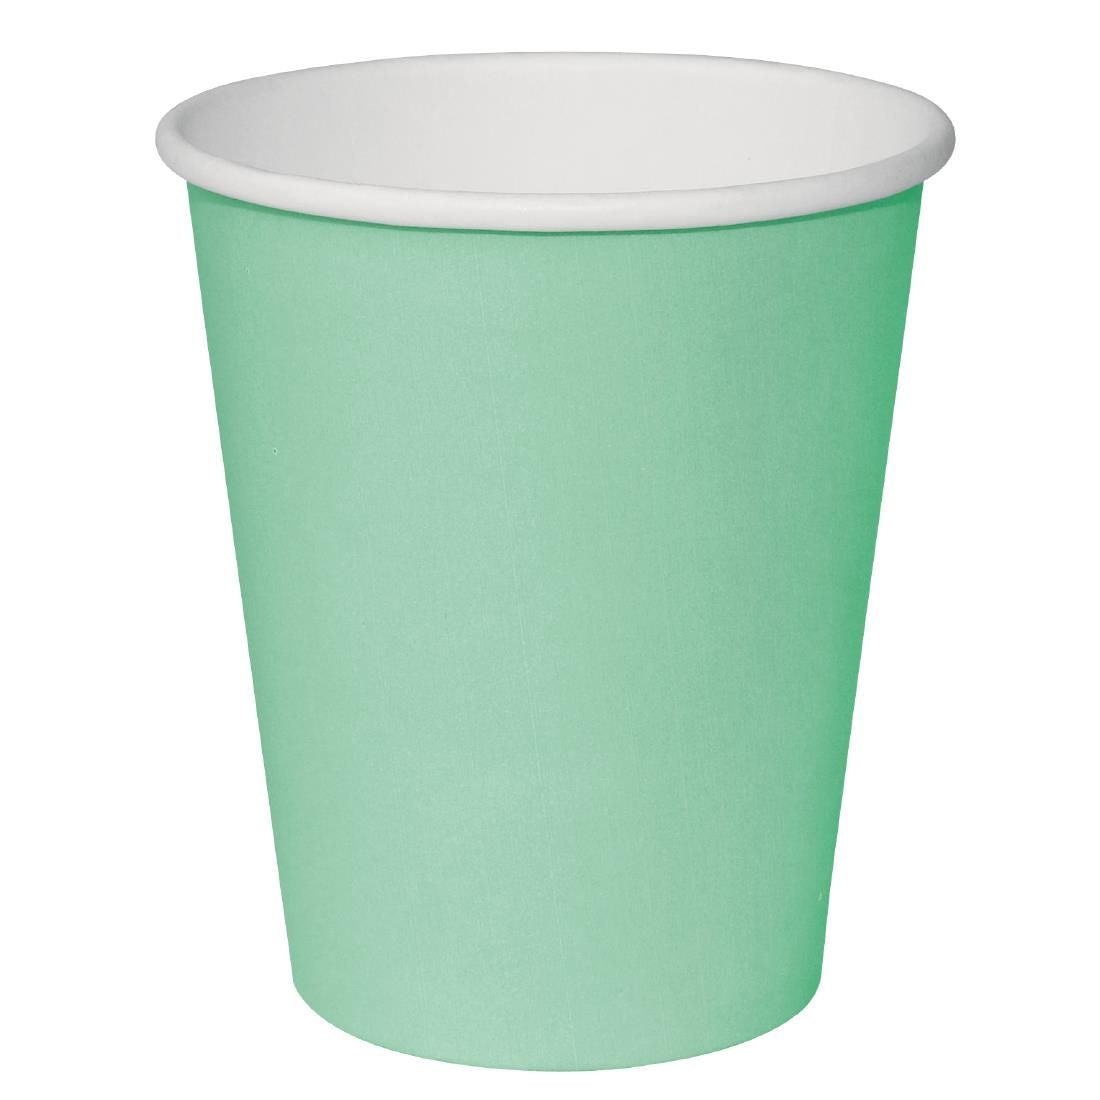 GP404 Fiesta Recyclable Single Wall Takeaway Coffee Cups Turquoise 340ml / 12oz (Pack of 1000) JD Catering Equipment Solutions Ltd